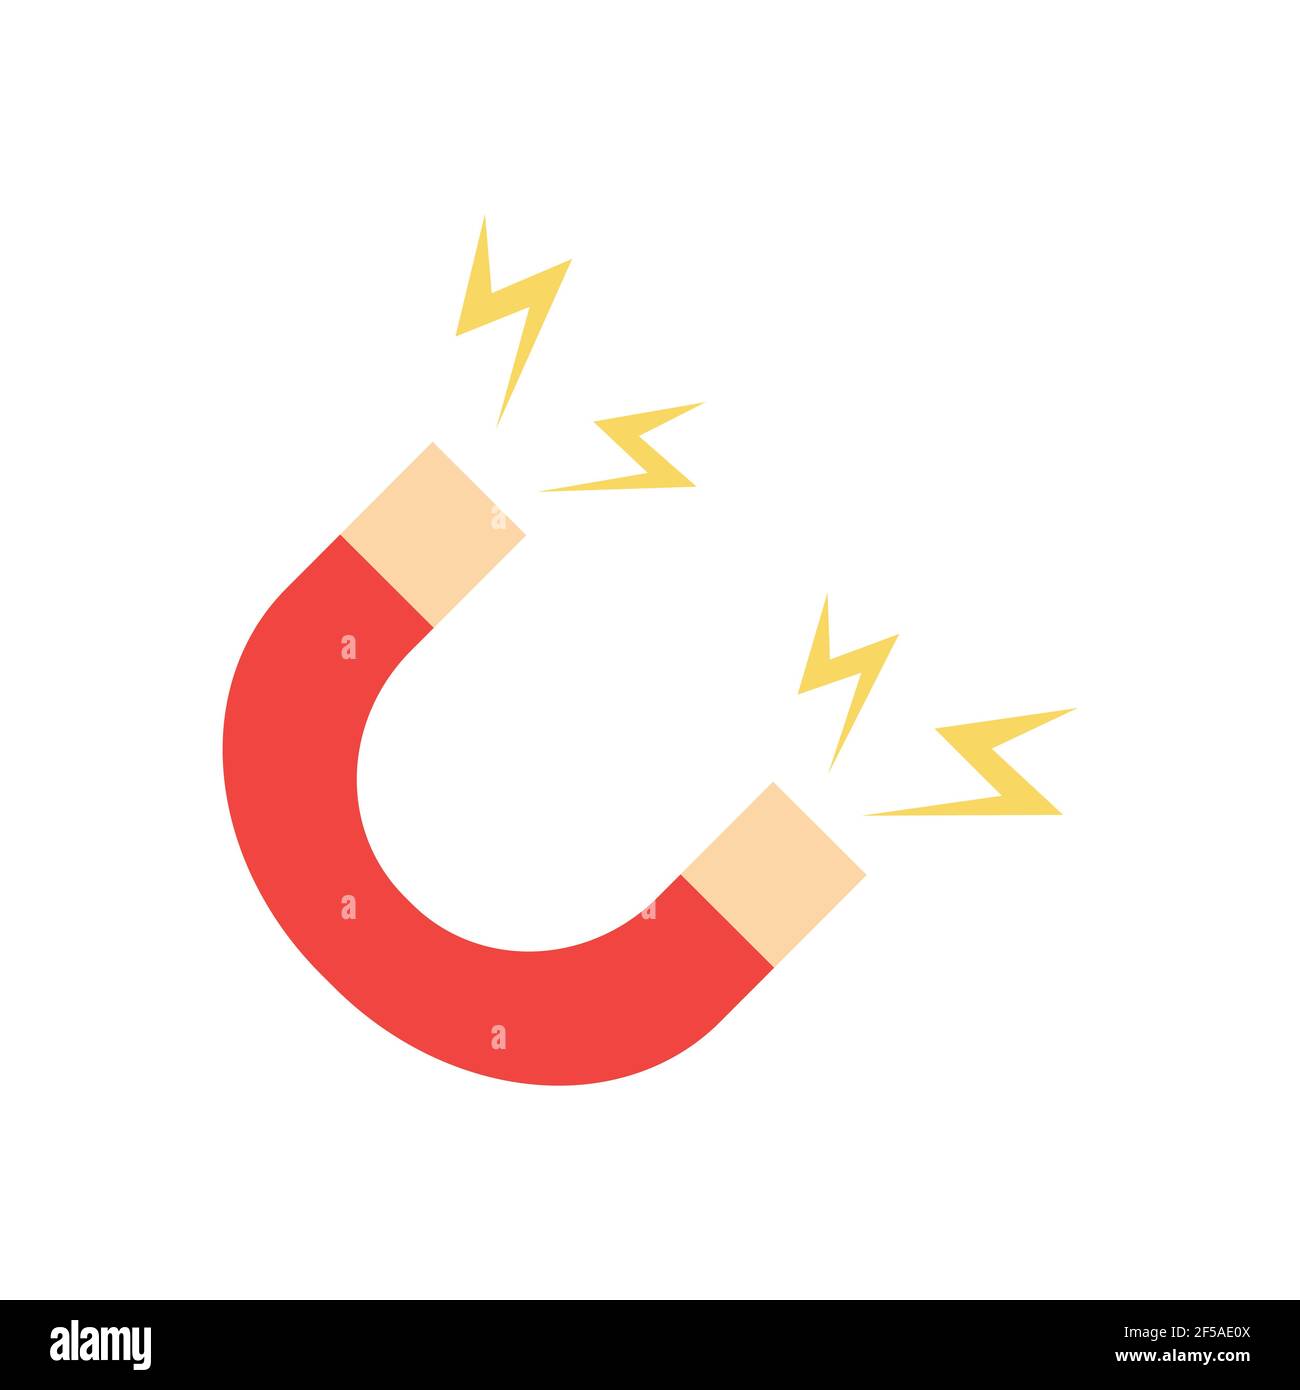 Vector illustration of red horseshoe magnet, magnetism, magnetize, attraction. Vector magnet icon in flat style. Stock Vector